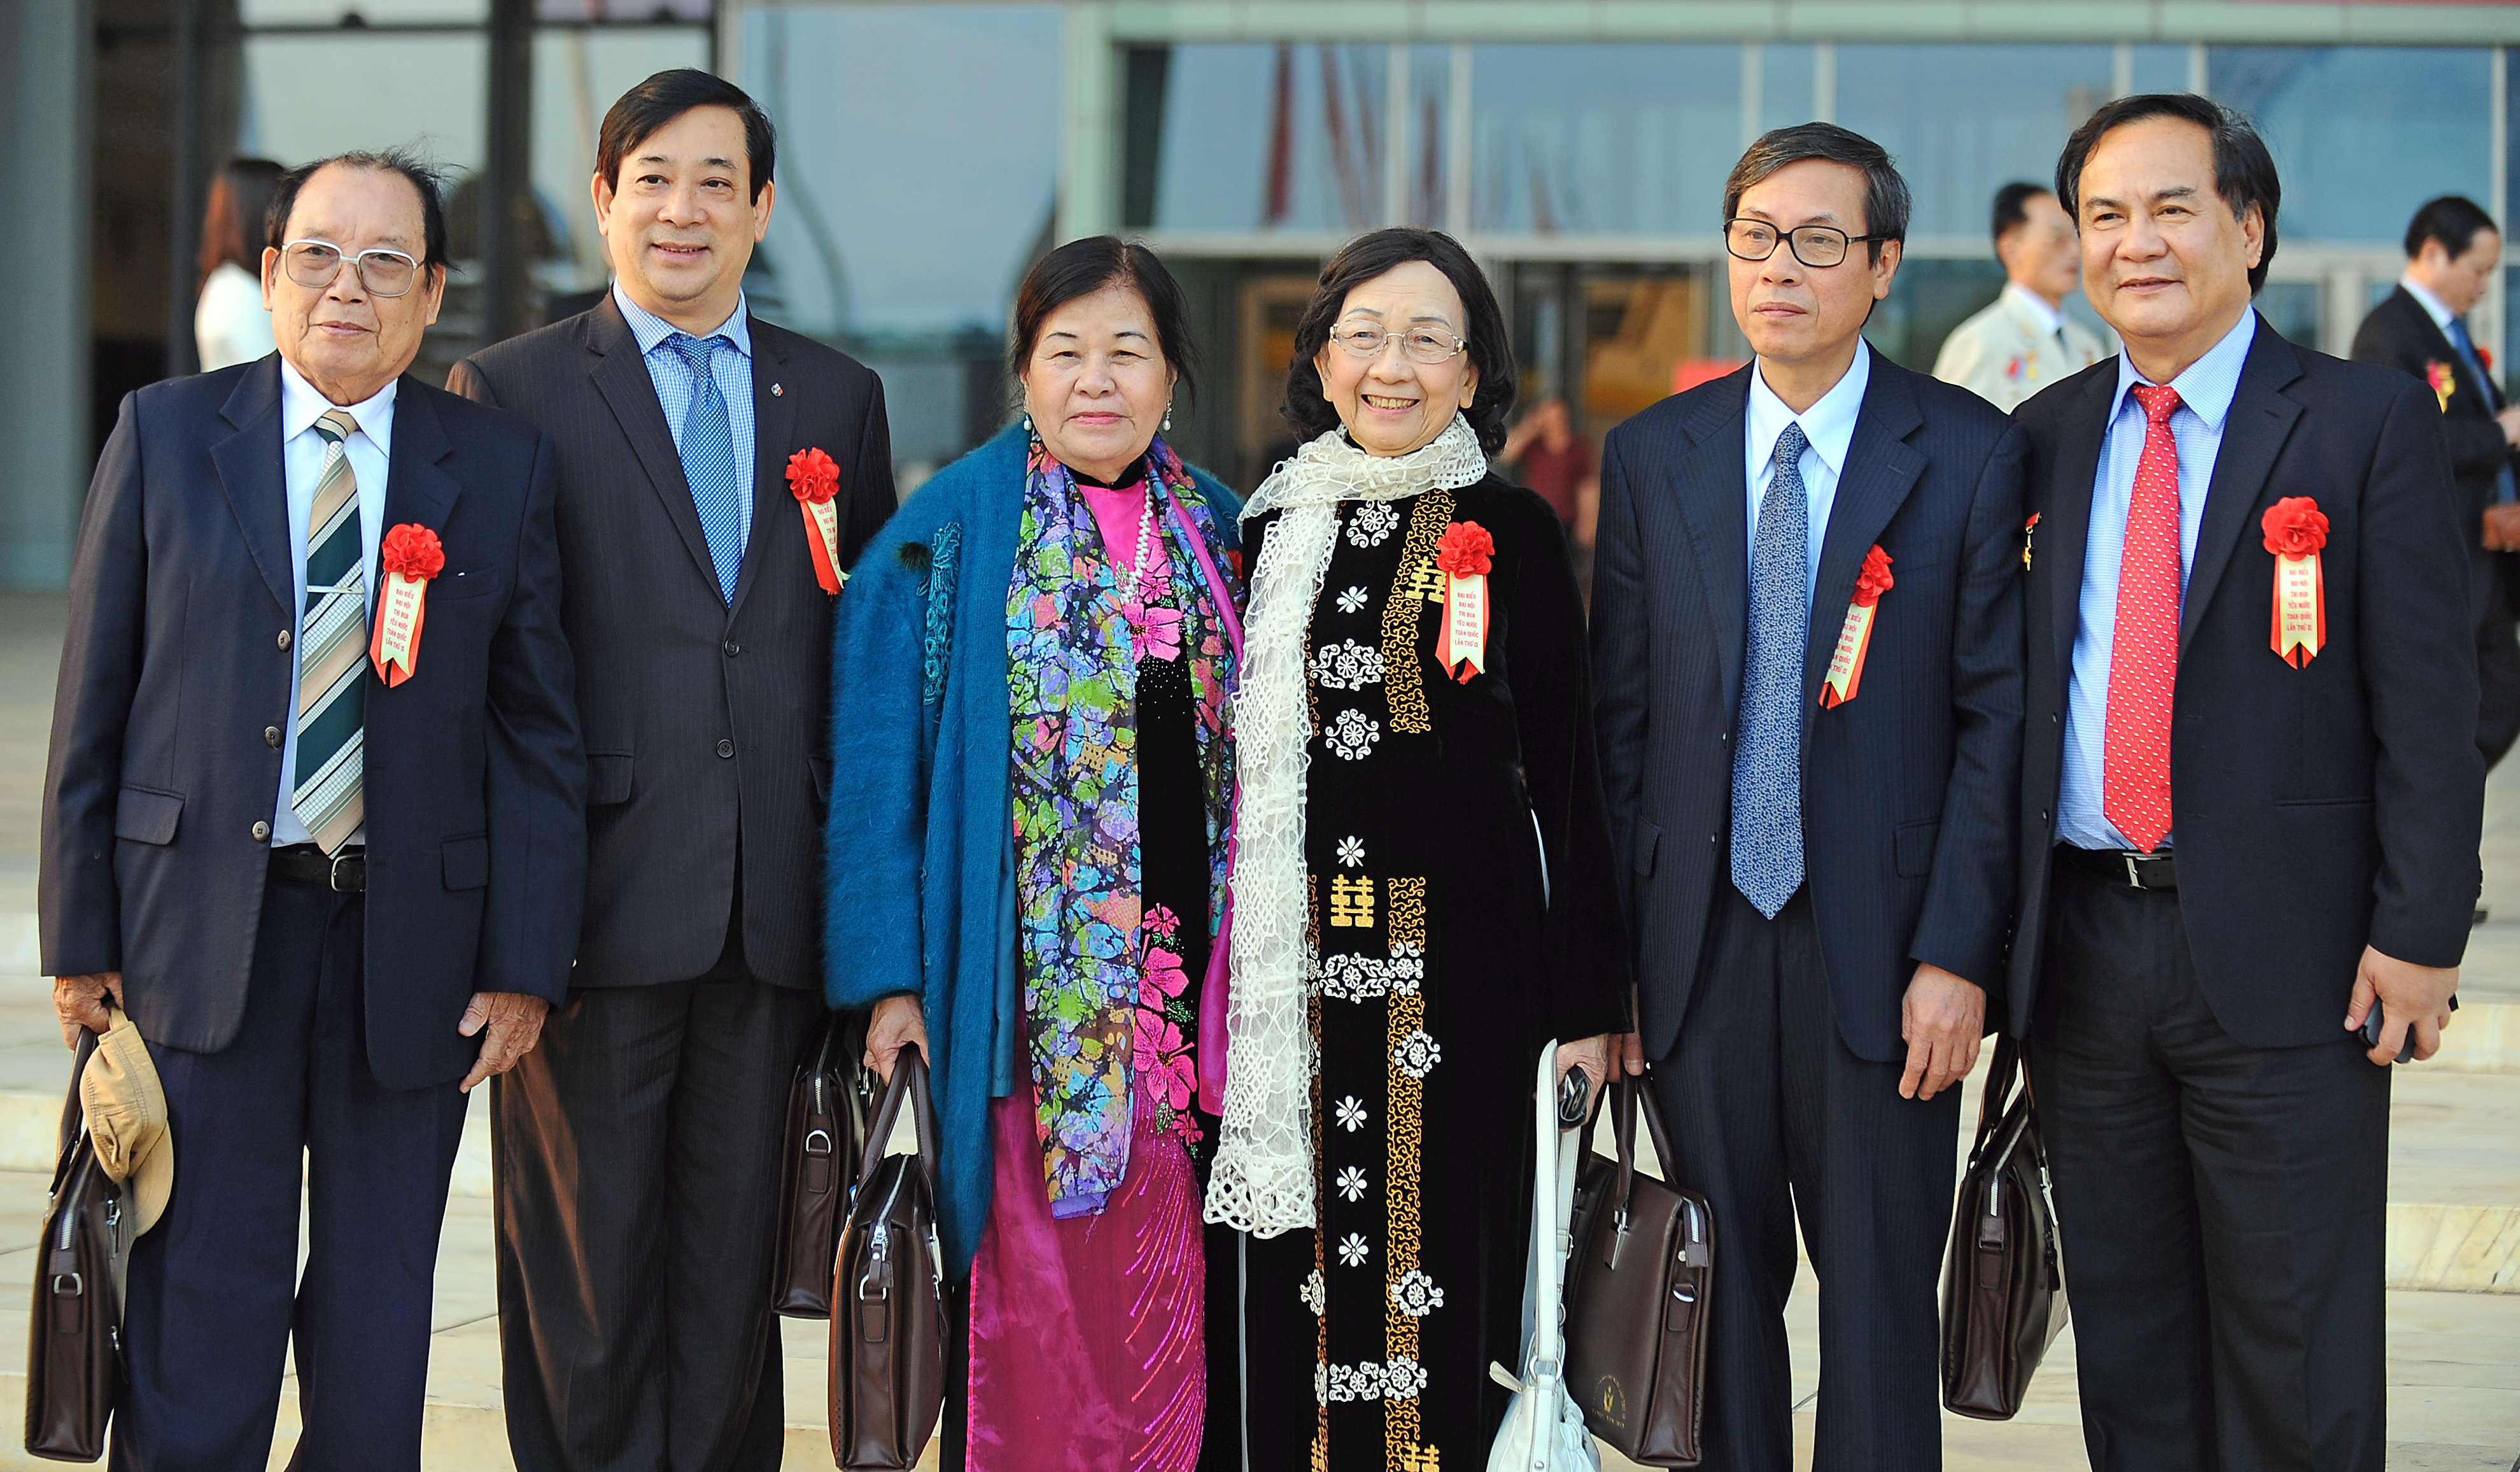 Doctor - Pharmacist Nguyen Thi Ngoc Tram Honorably Participated In The Residium Of The 9th National Patriotic Emulation Congress